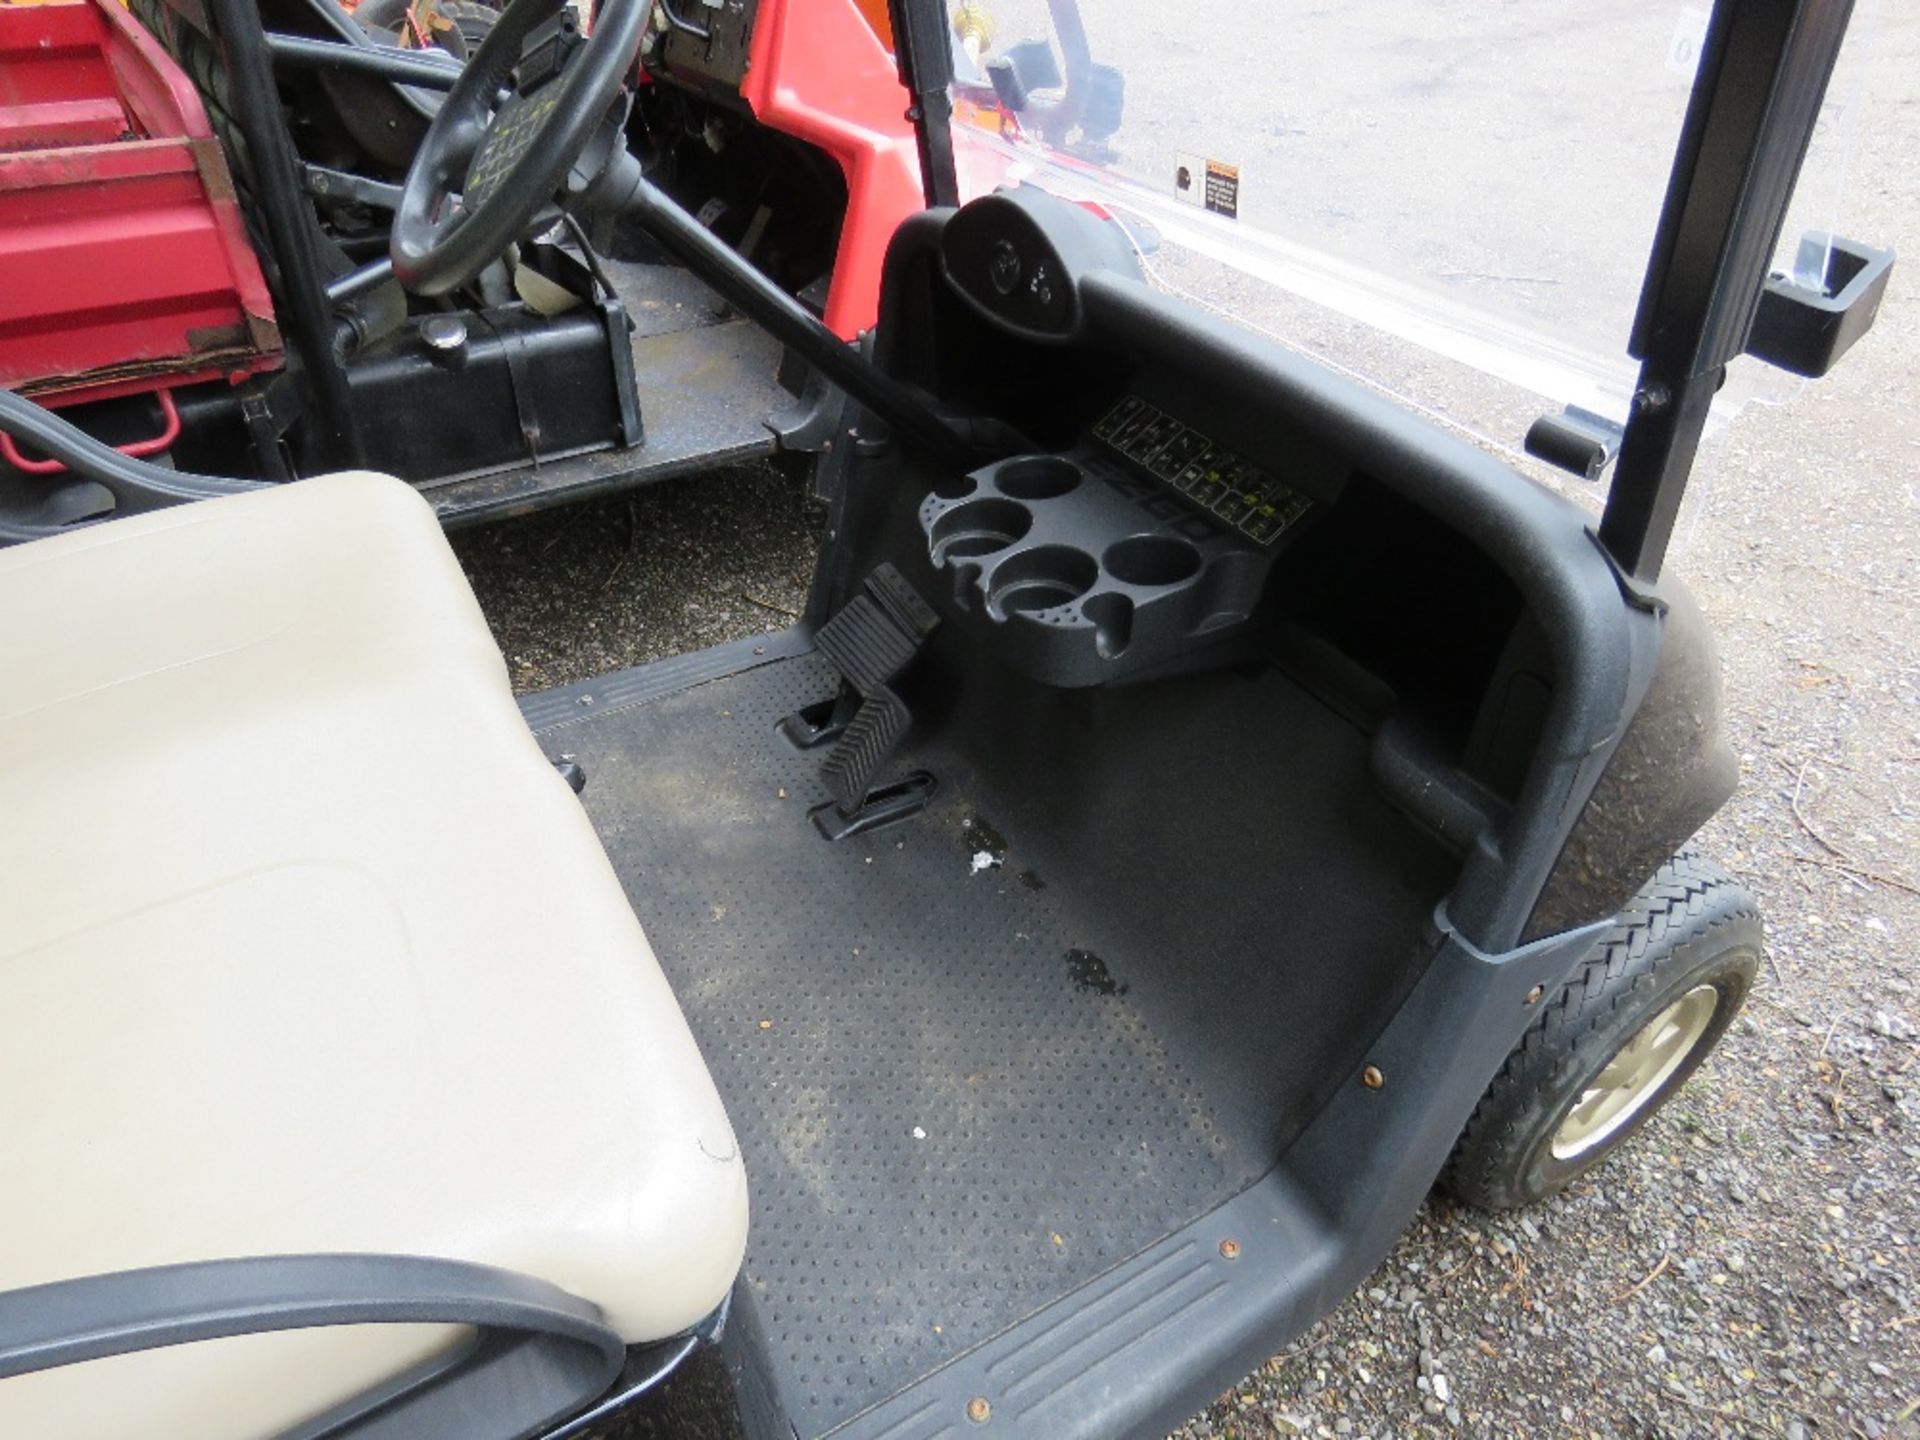 EZGO RXV PETROL ENGINED GOLF BUGGY, YEAR 2013. SN:5201684. WHEN TESTED WAS SEEN TO RUN AND DRIVE, ST - Image 2 of 5